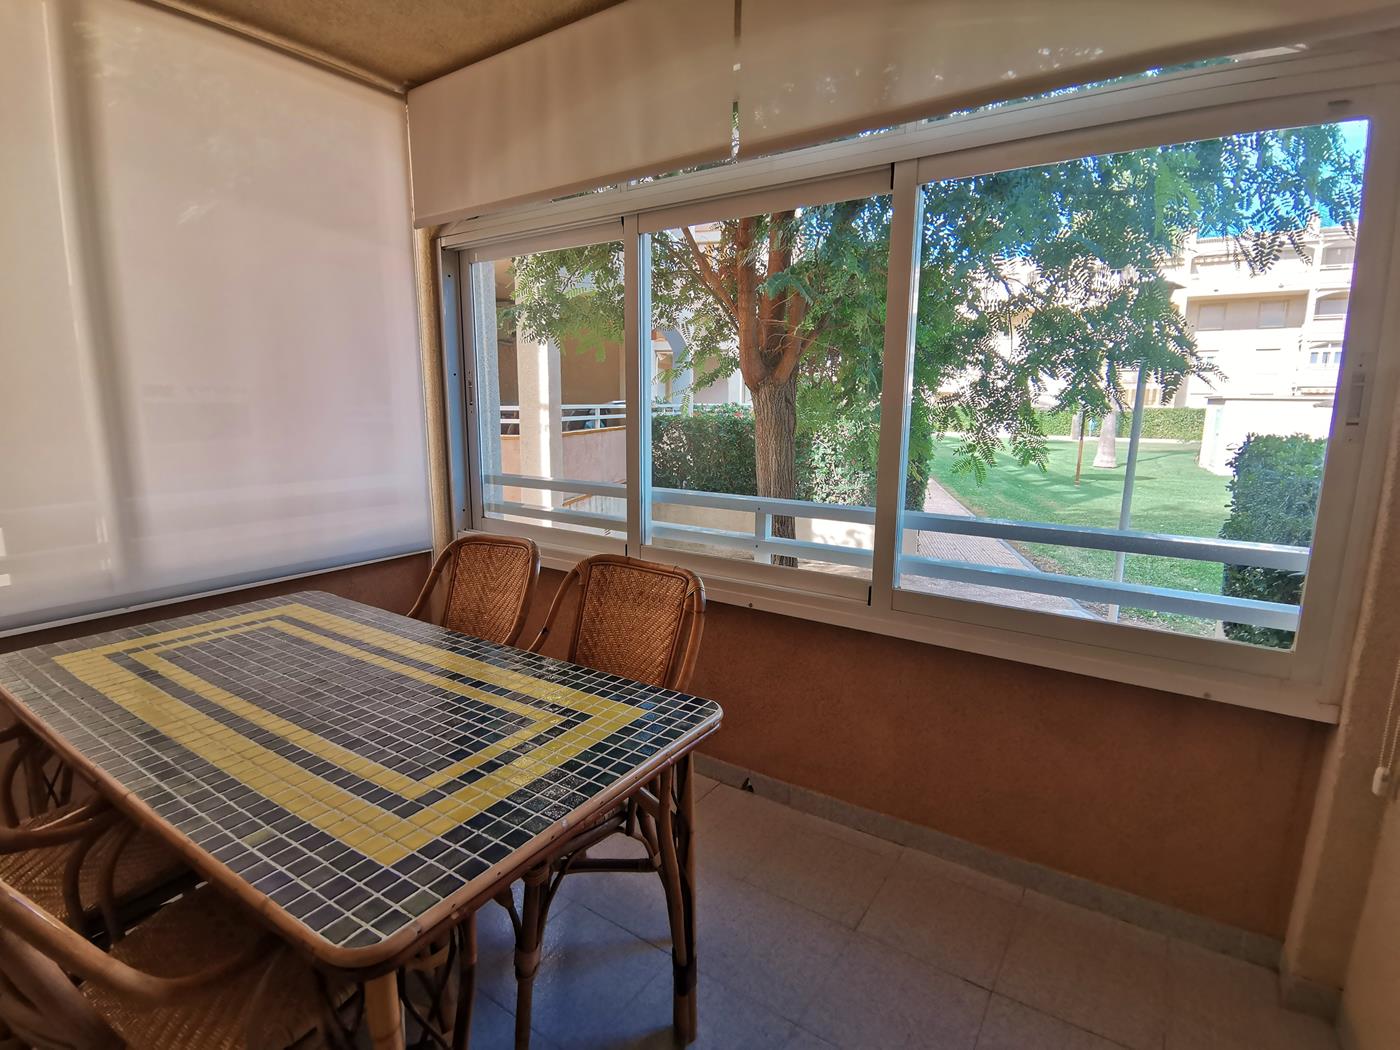 Apartment for sale first line Denia